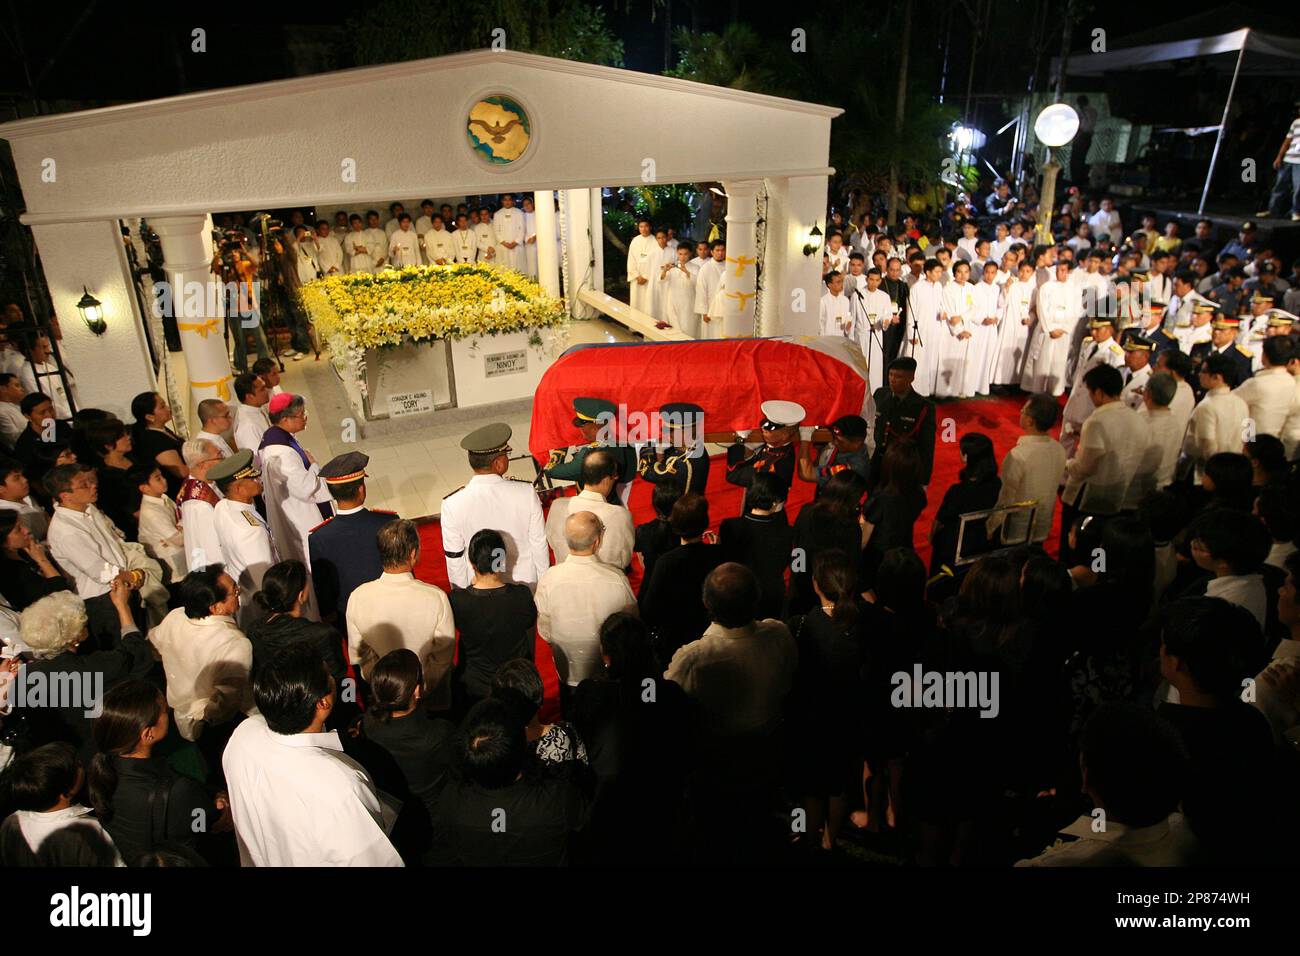 The casket containing the remains of former Philippine President Corazon 'Cory' Aquino are brought to her burial site in Paranaque City, southern Manila, Philippines Wednesday Aug. 5, 2009. A procession dubbed as a 'people's funeral' was held for the burial on Wednesday of Cory Aquino, who became president after a people's uprising ousted the late president Ferdinand Marcos in 1986. Aquino died on Aug. 1, at the age of 76 after battling cancer for more than a year. (AP Photo/Rolex Dela Pena, Pool) Stock Photo